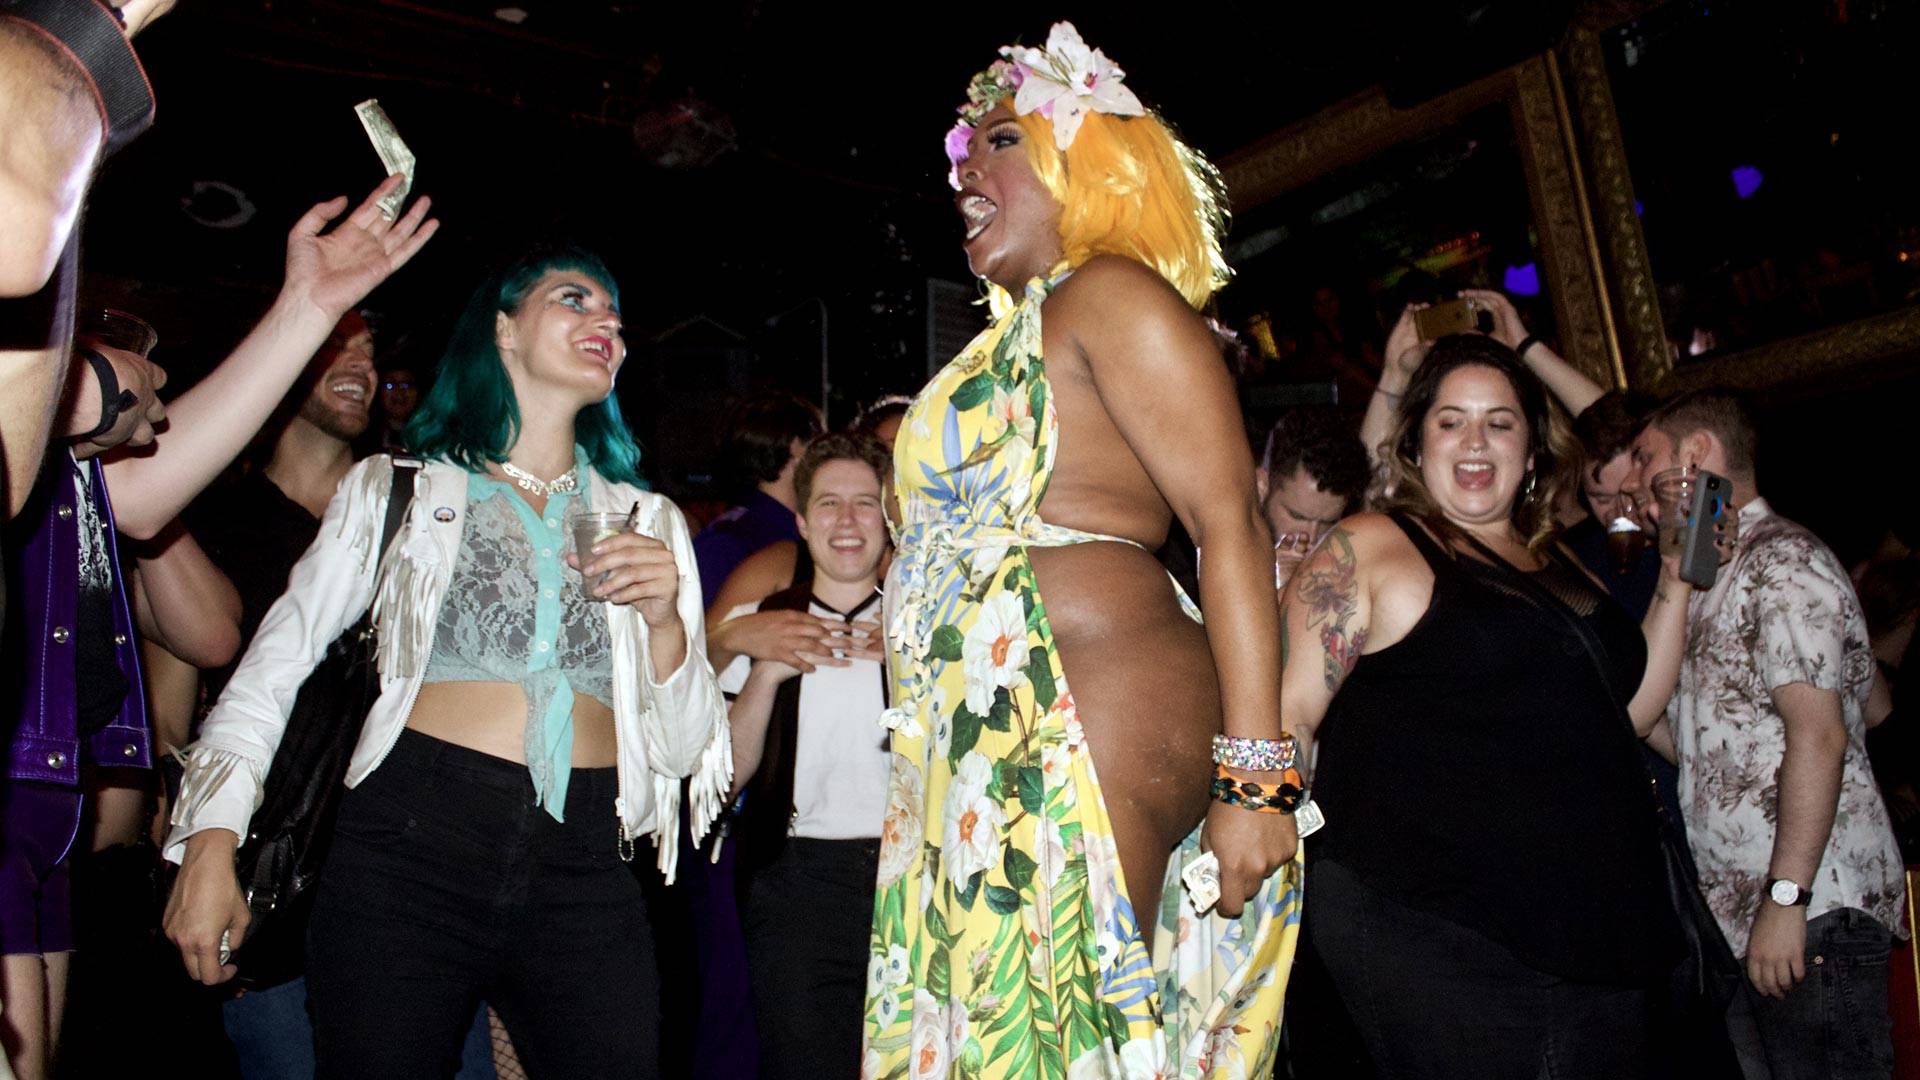 Bionka Simone walks into the crowd while performing a lip-sync to 'What's Up' by the 4 Non Blondes on Sept. 22.  Audrey Garces/KQED